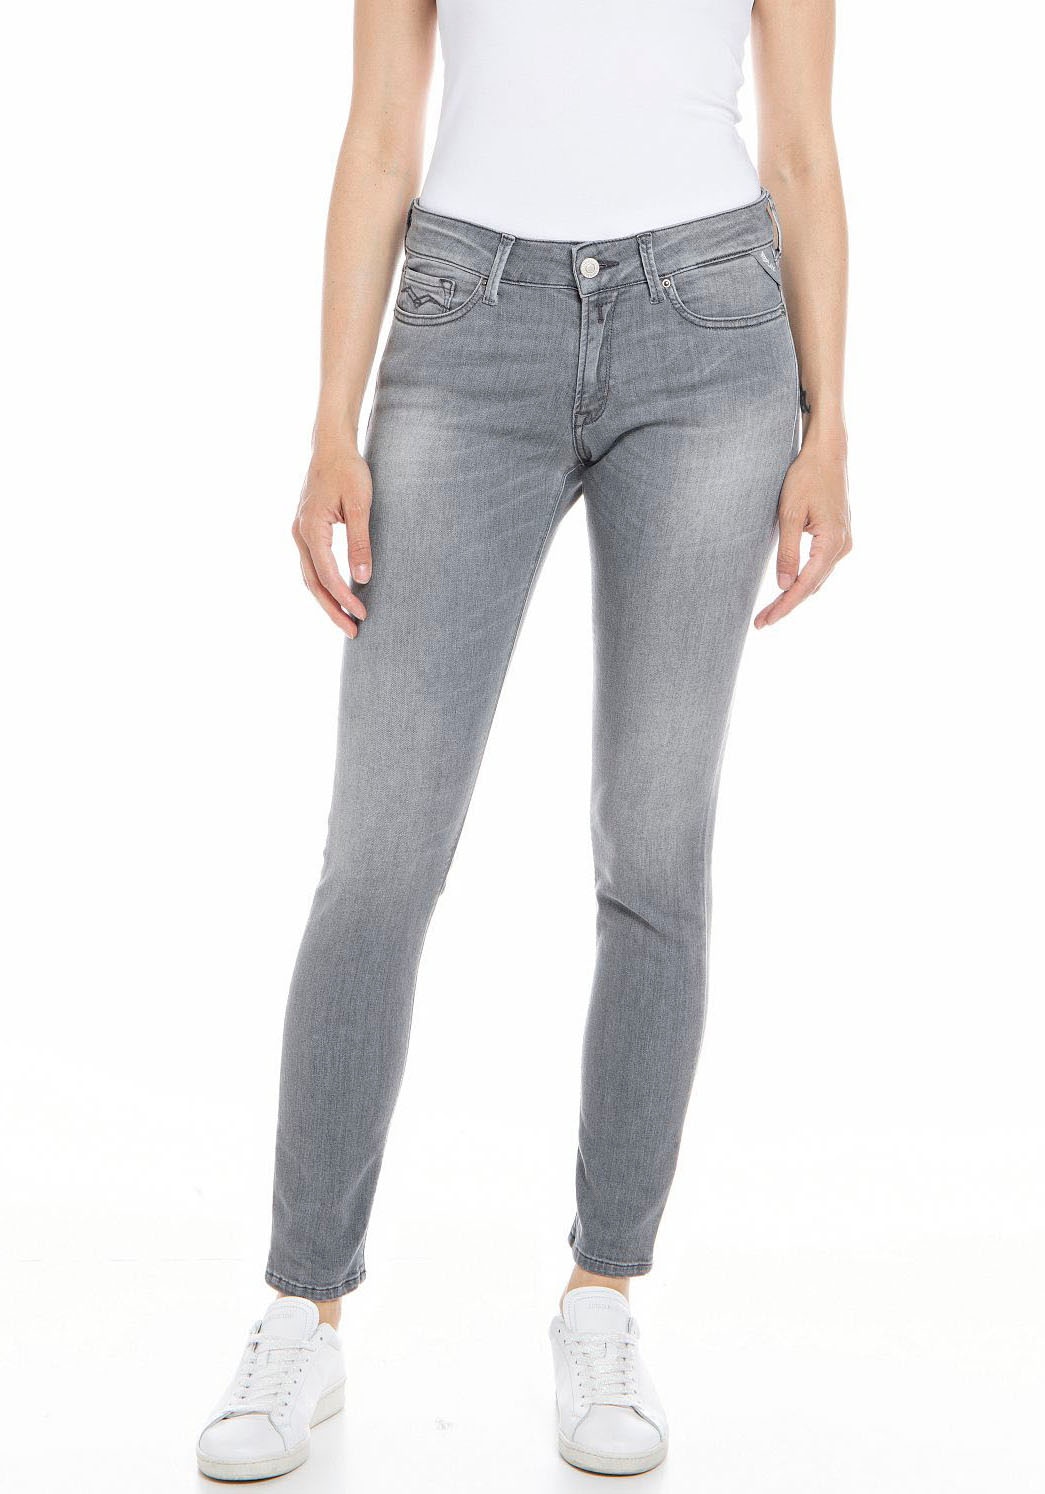 Replay Skinny-fit-Jeans »NEW LUZ«, in kaufen Ankle-Länge online